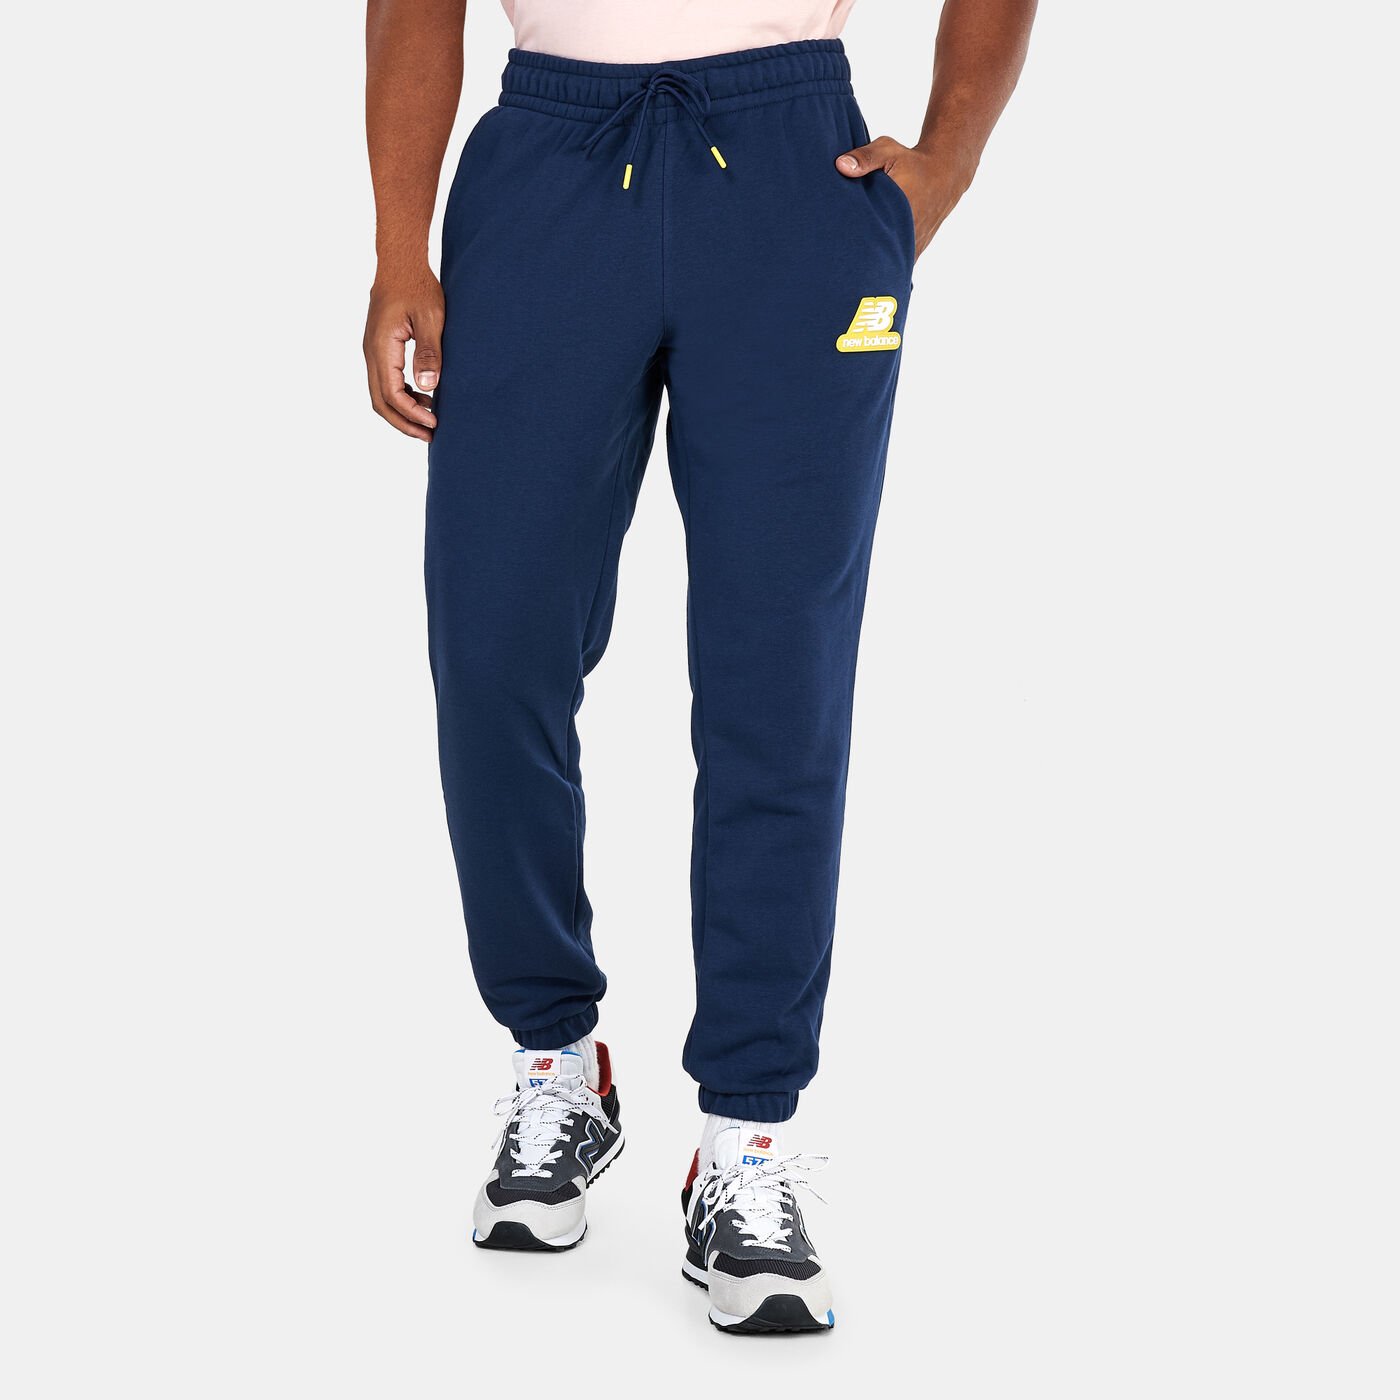 Men's NB Essentials Stacked Rubber Pack Sweatpants